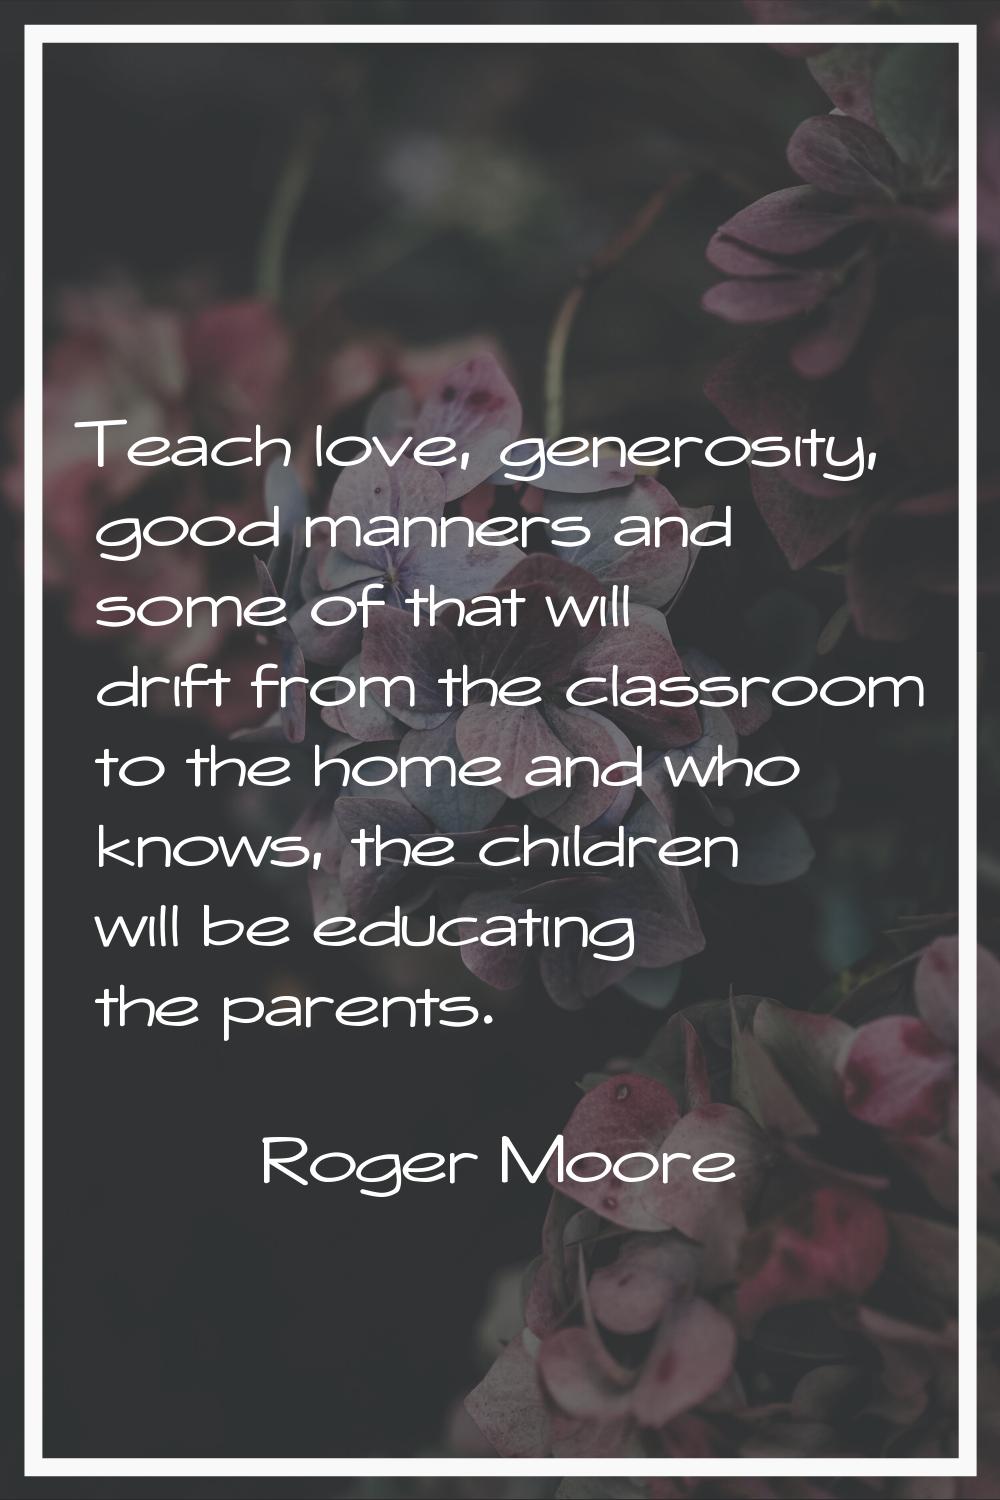 Teach love, generosity, good manners and some of that will drift from the classroom to the home and